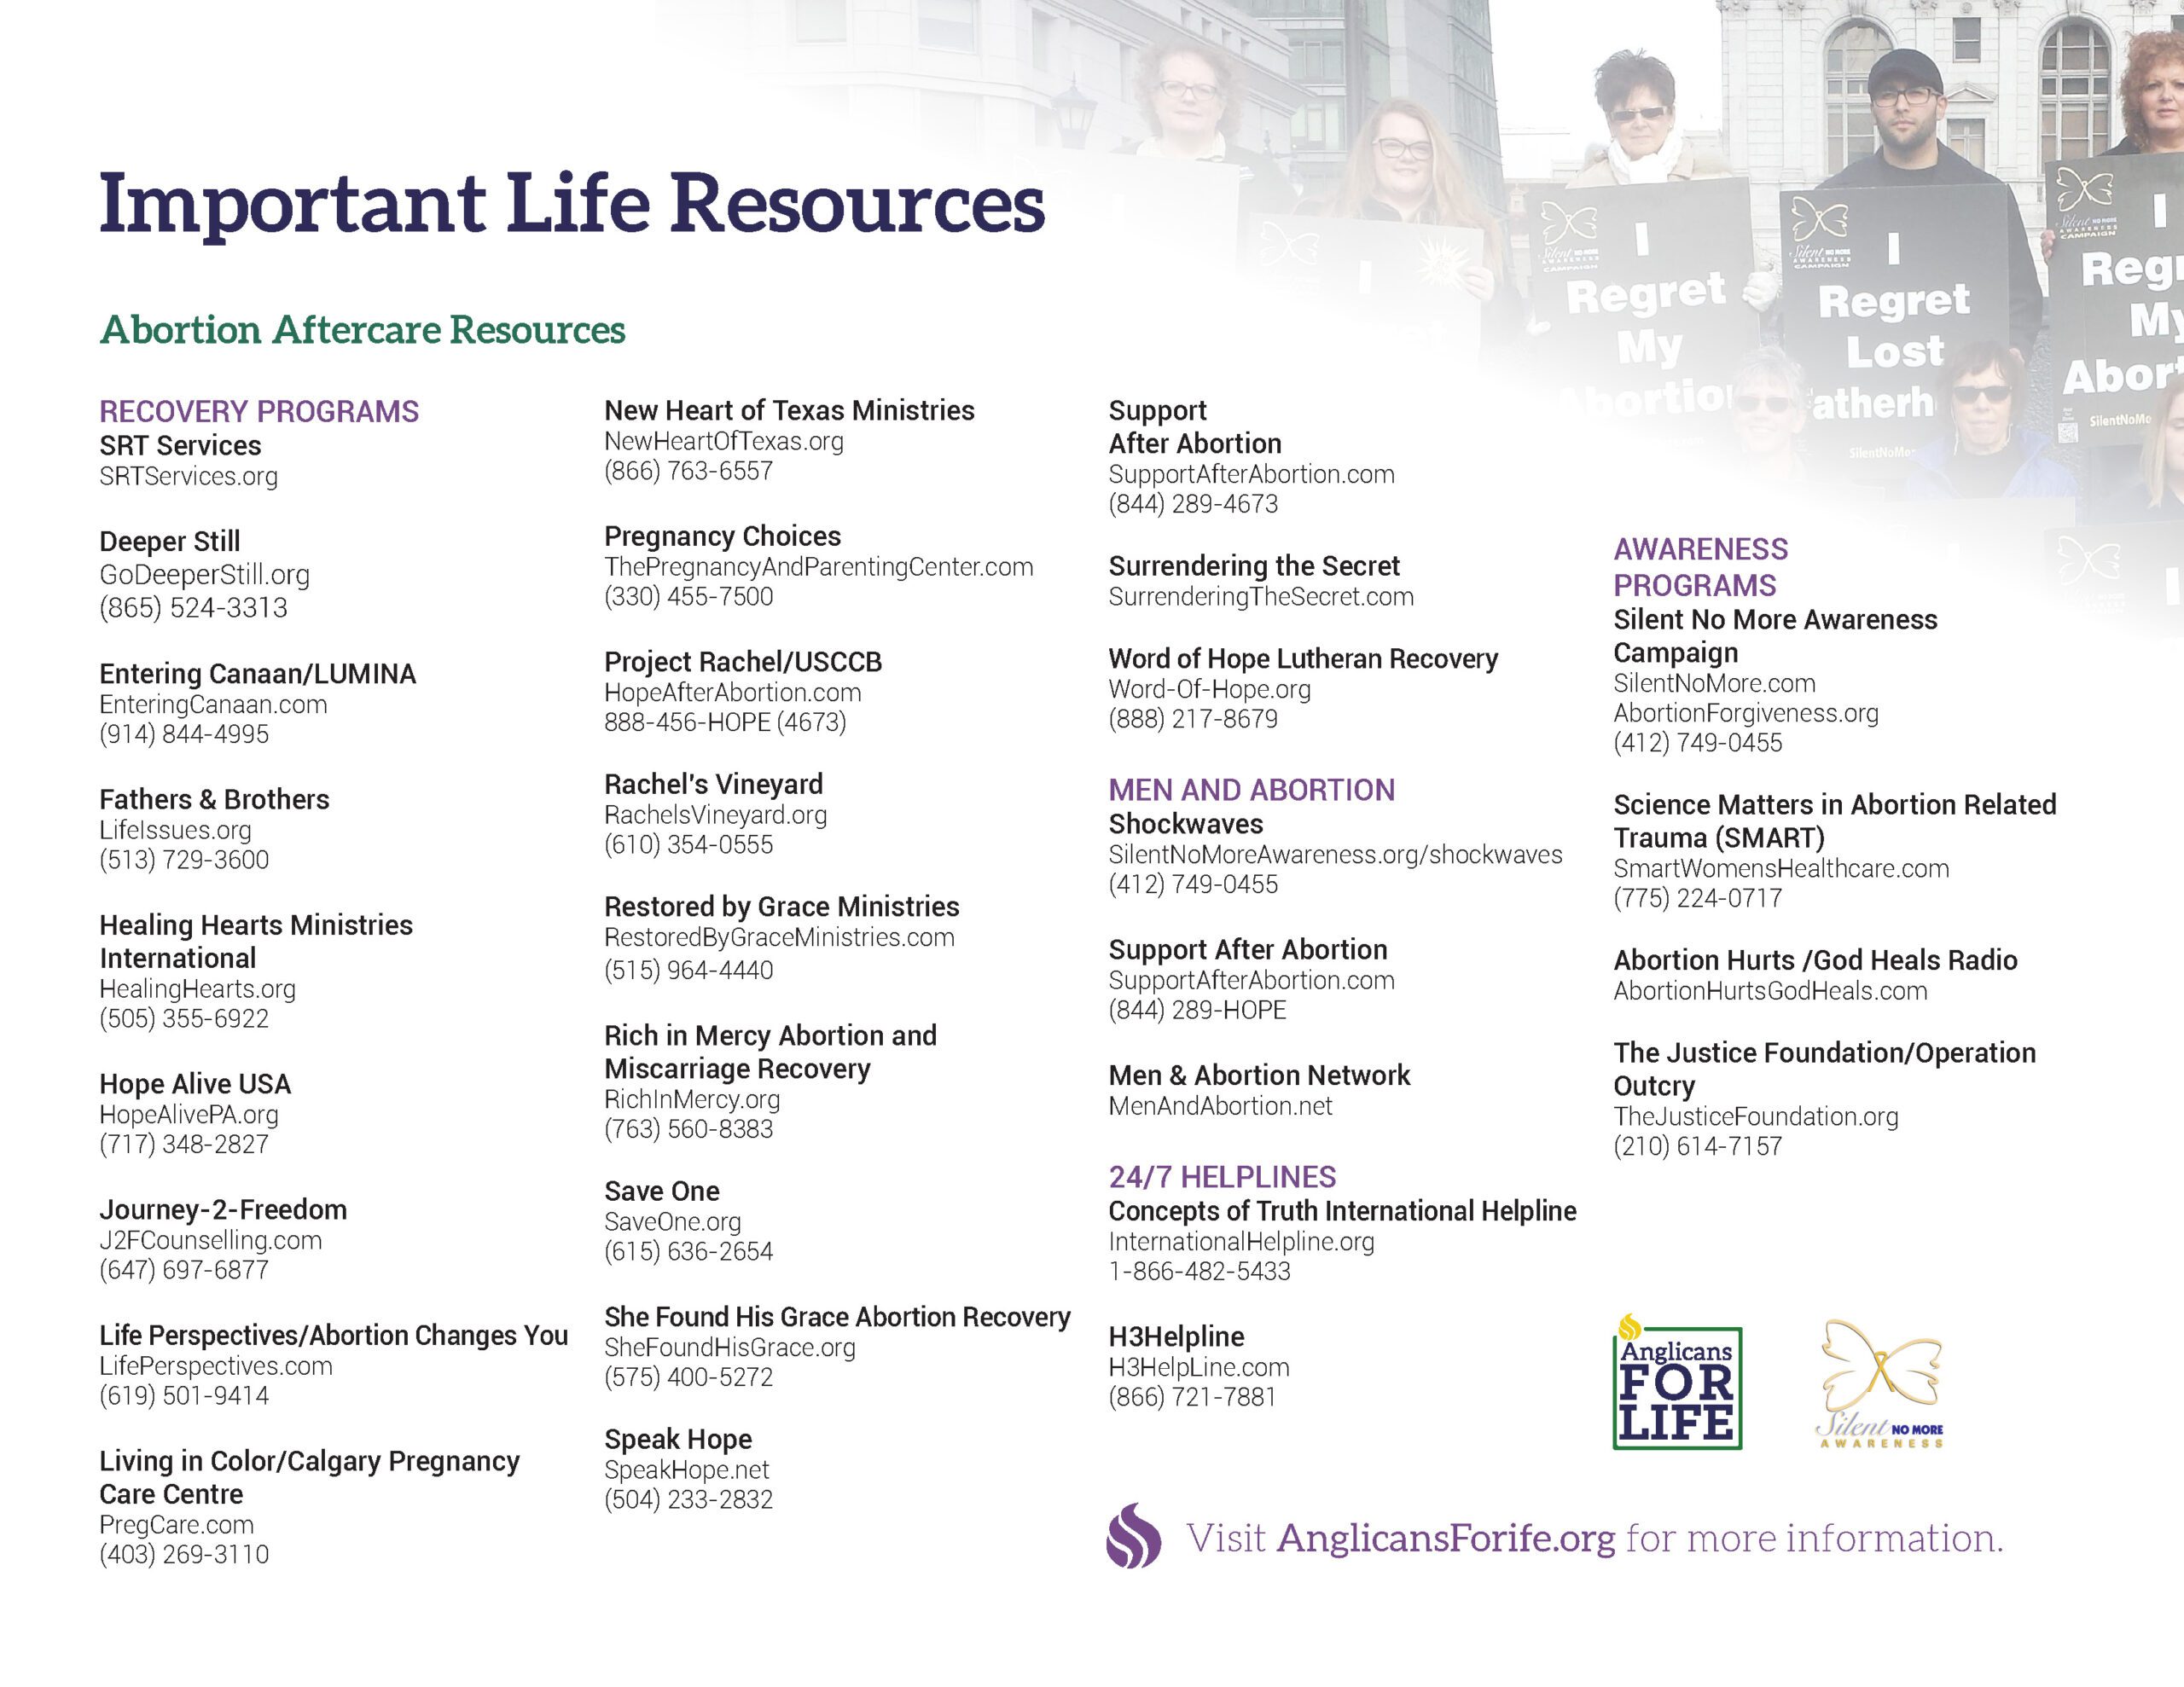 Important resources for life printable guide